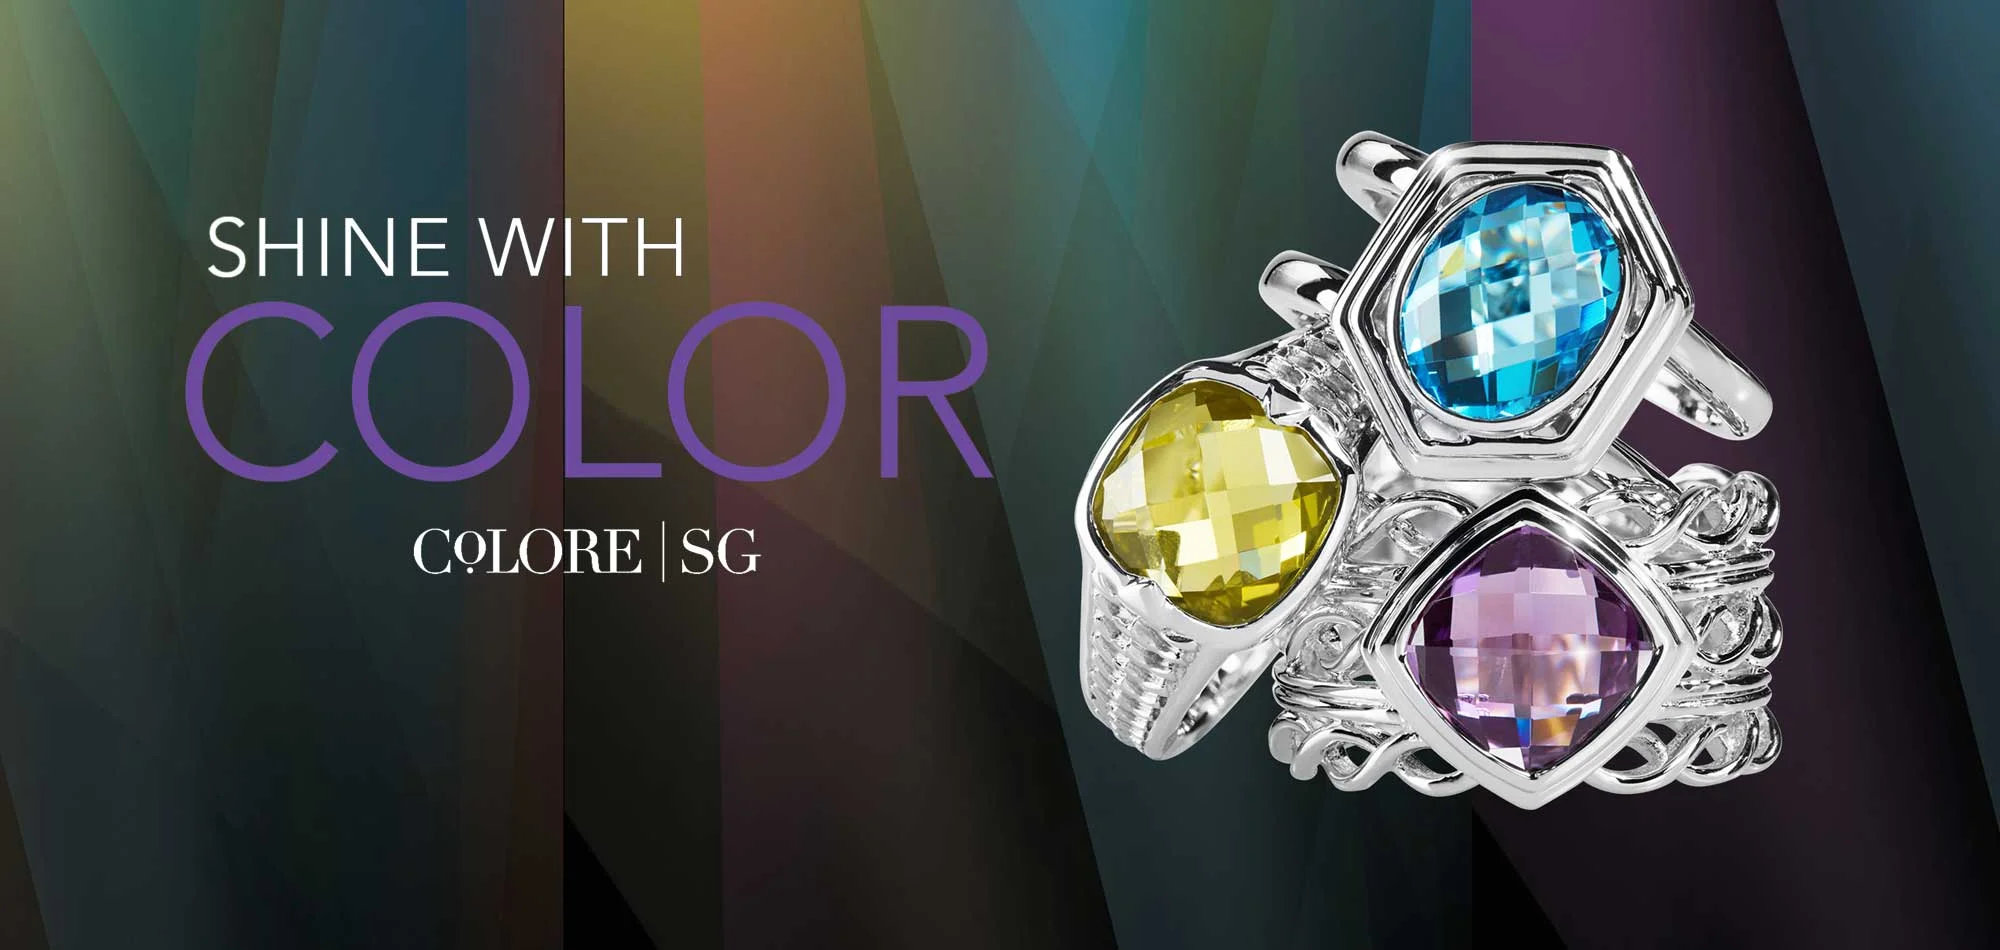 Gemstone Ring Collection at M&M Jewelers